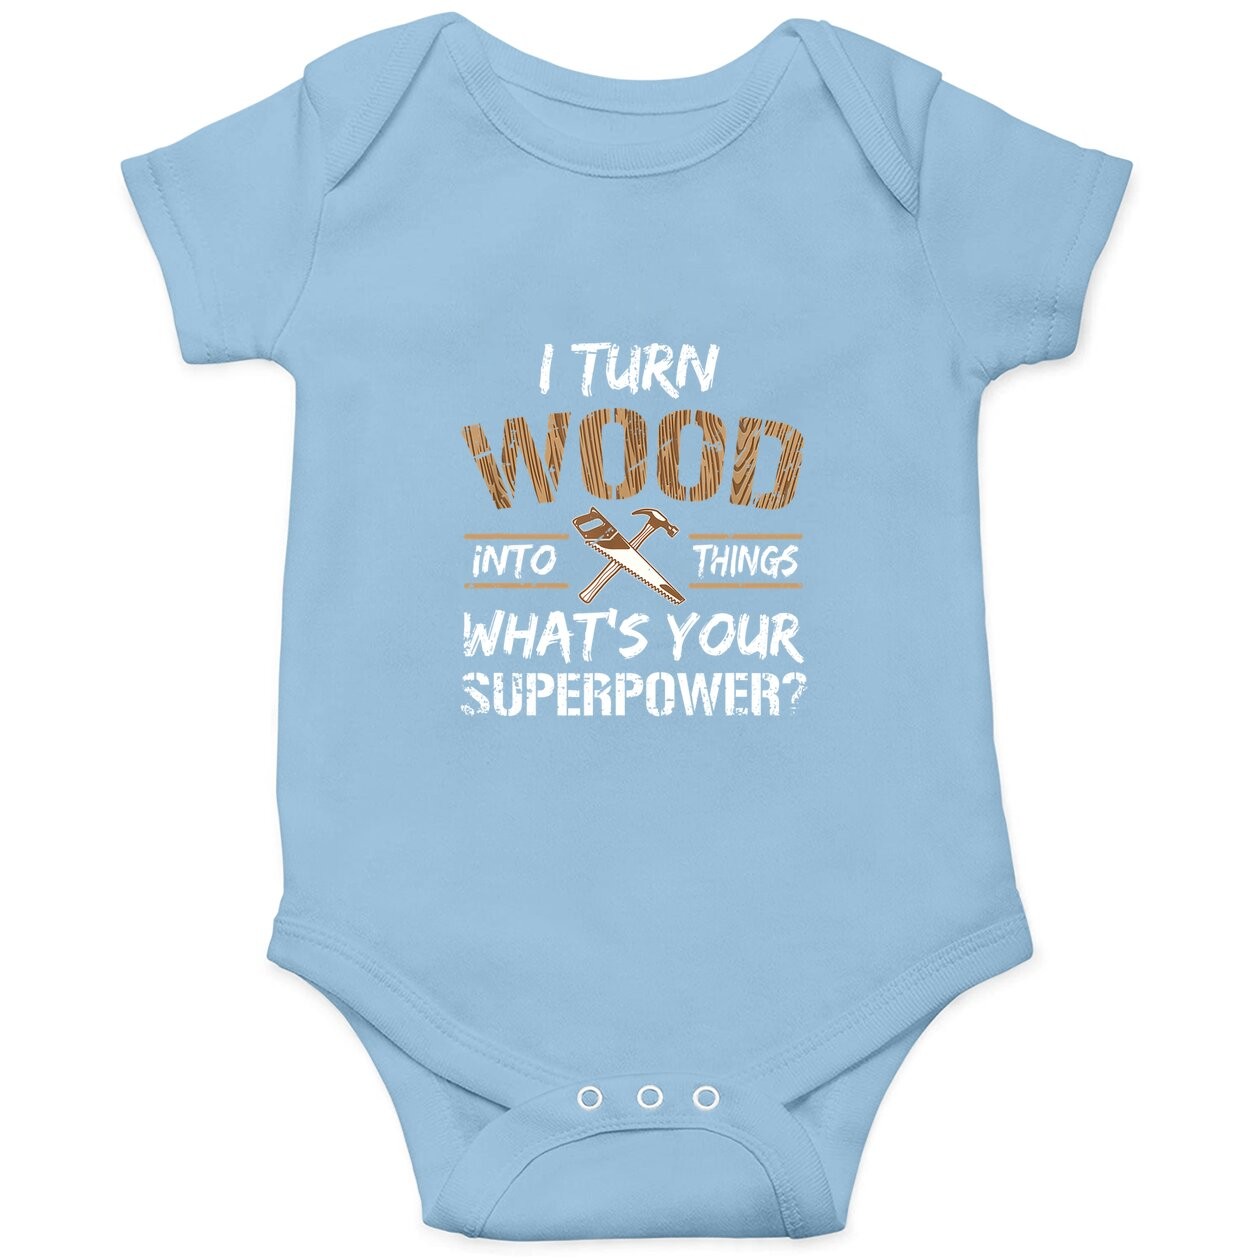 I Turn Wood Into Things Carpenter Woodworking Baby Bodysuit